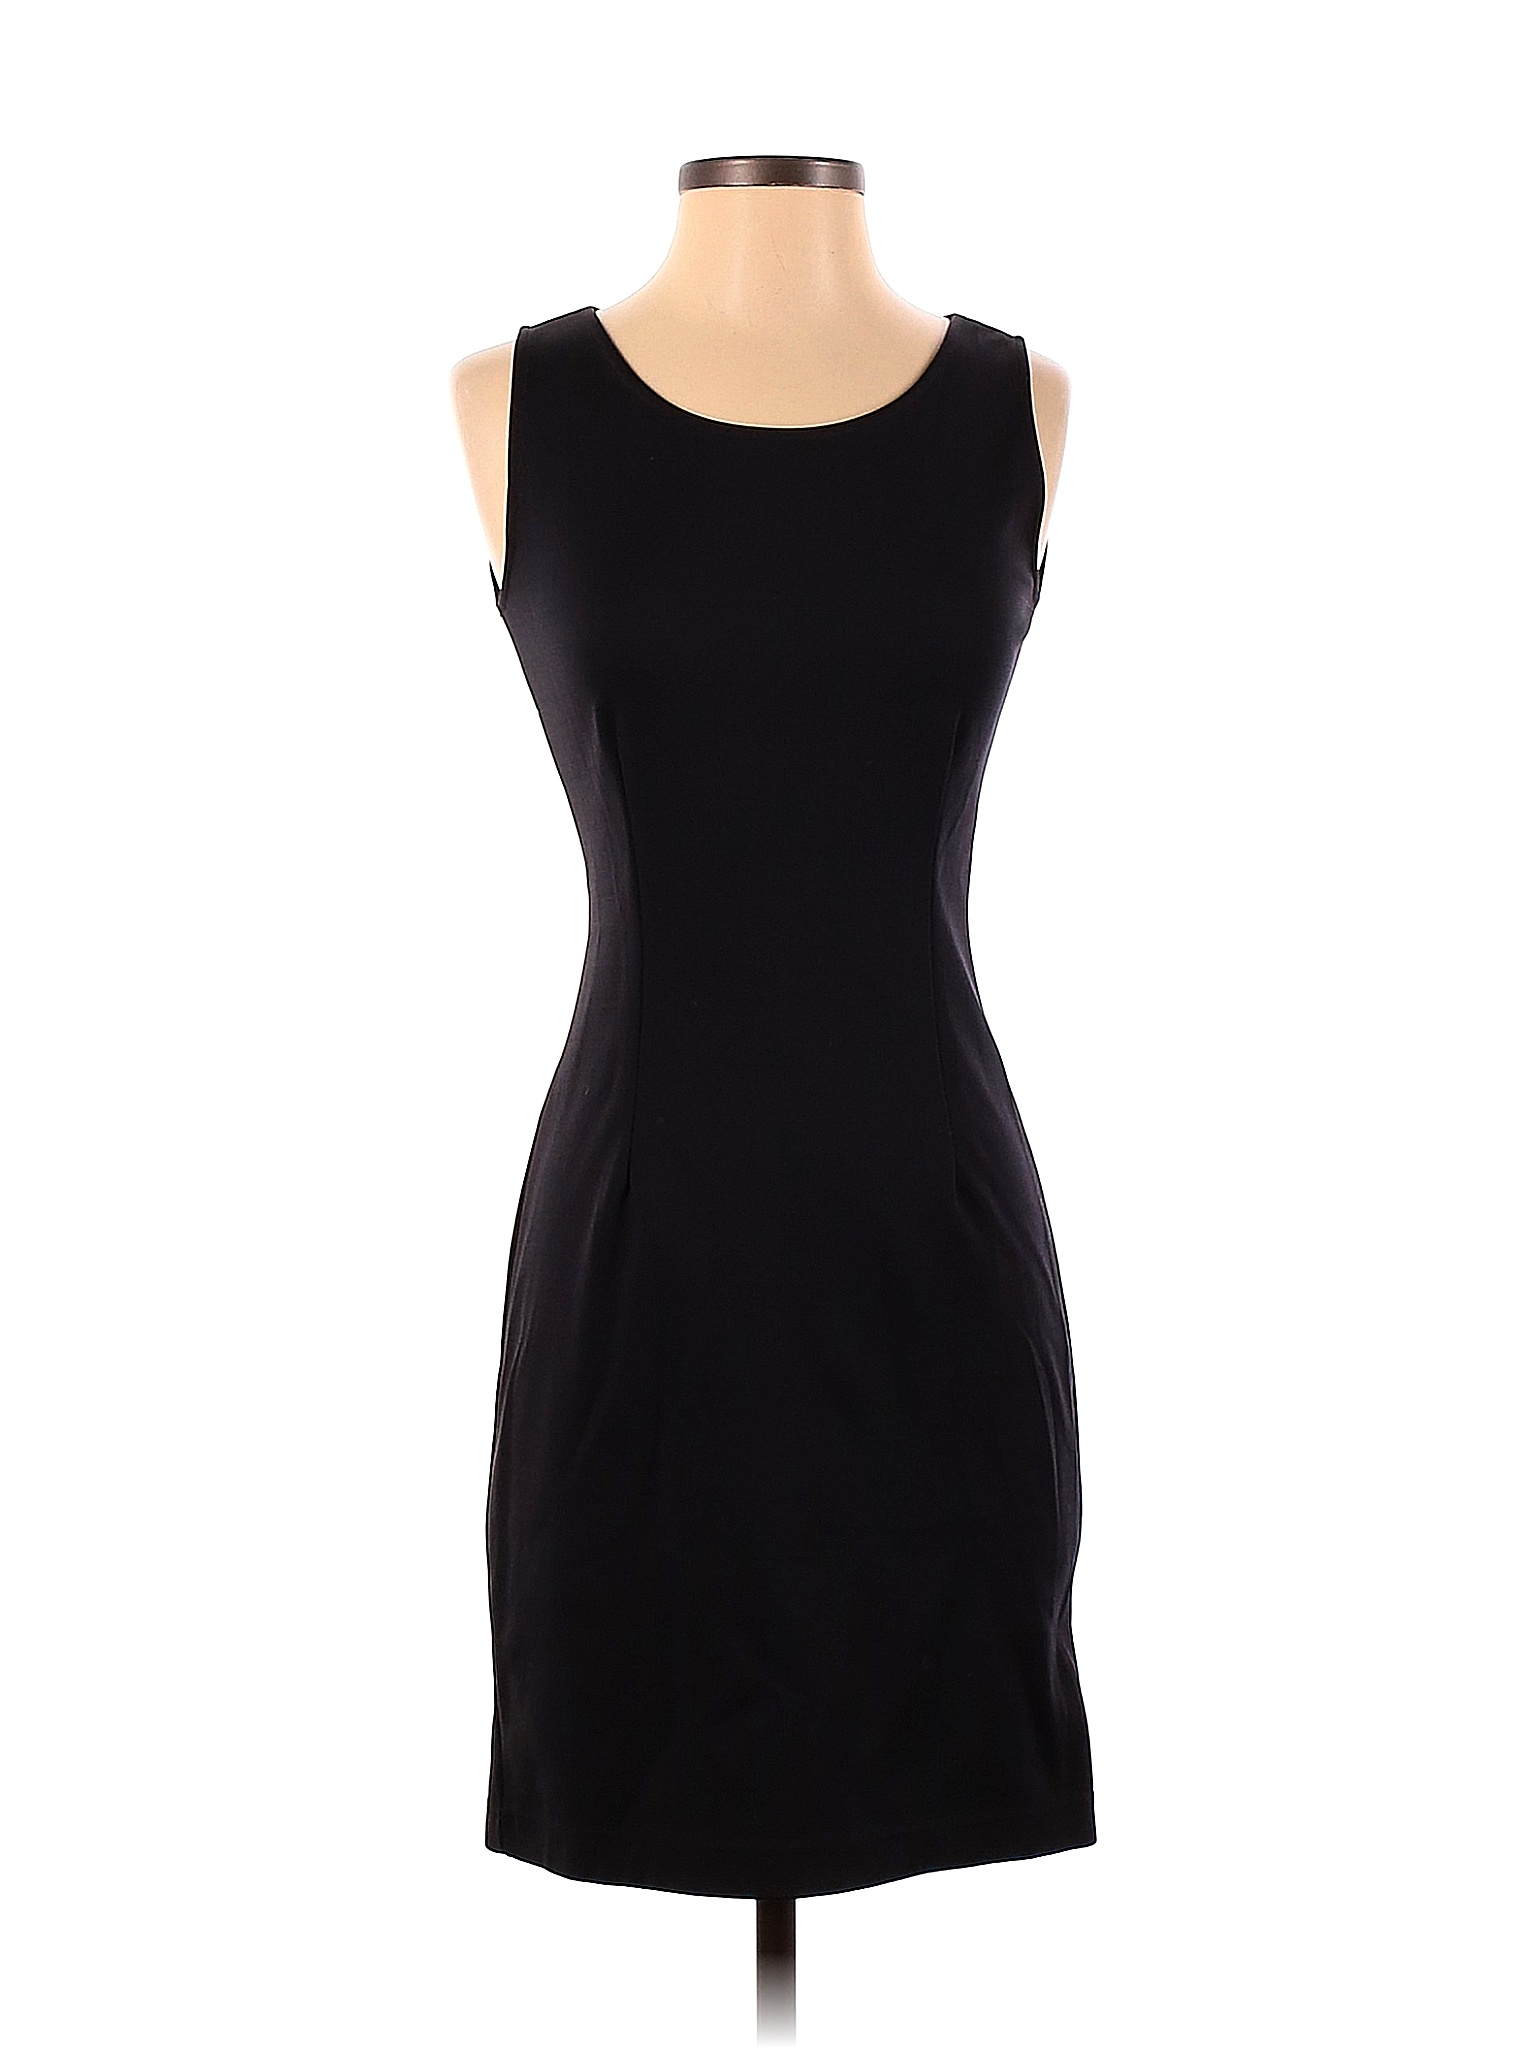 H&M Solid Black Casual Dress Size 4 - 71% off | thredUP